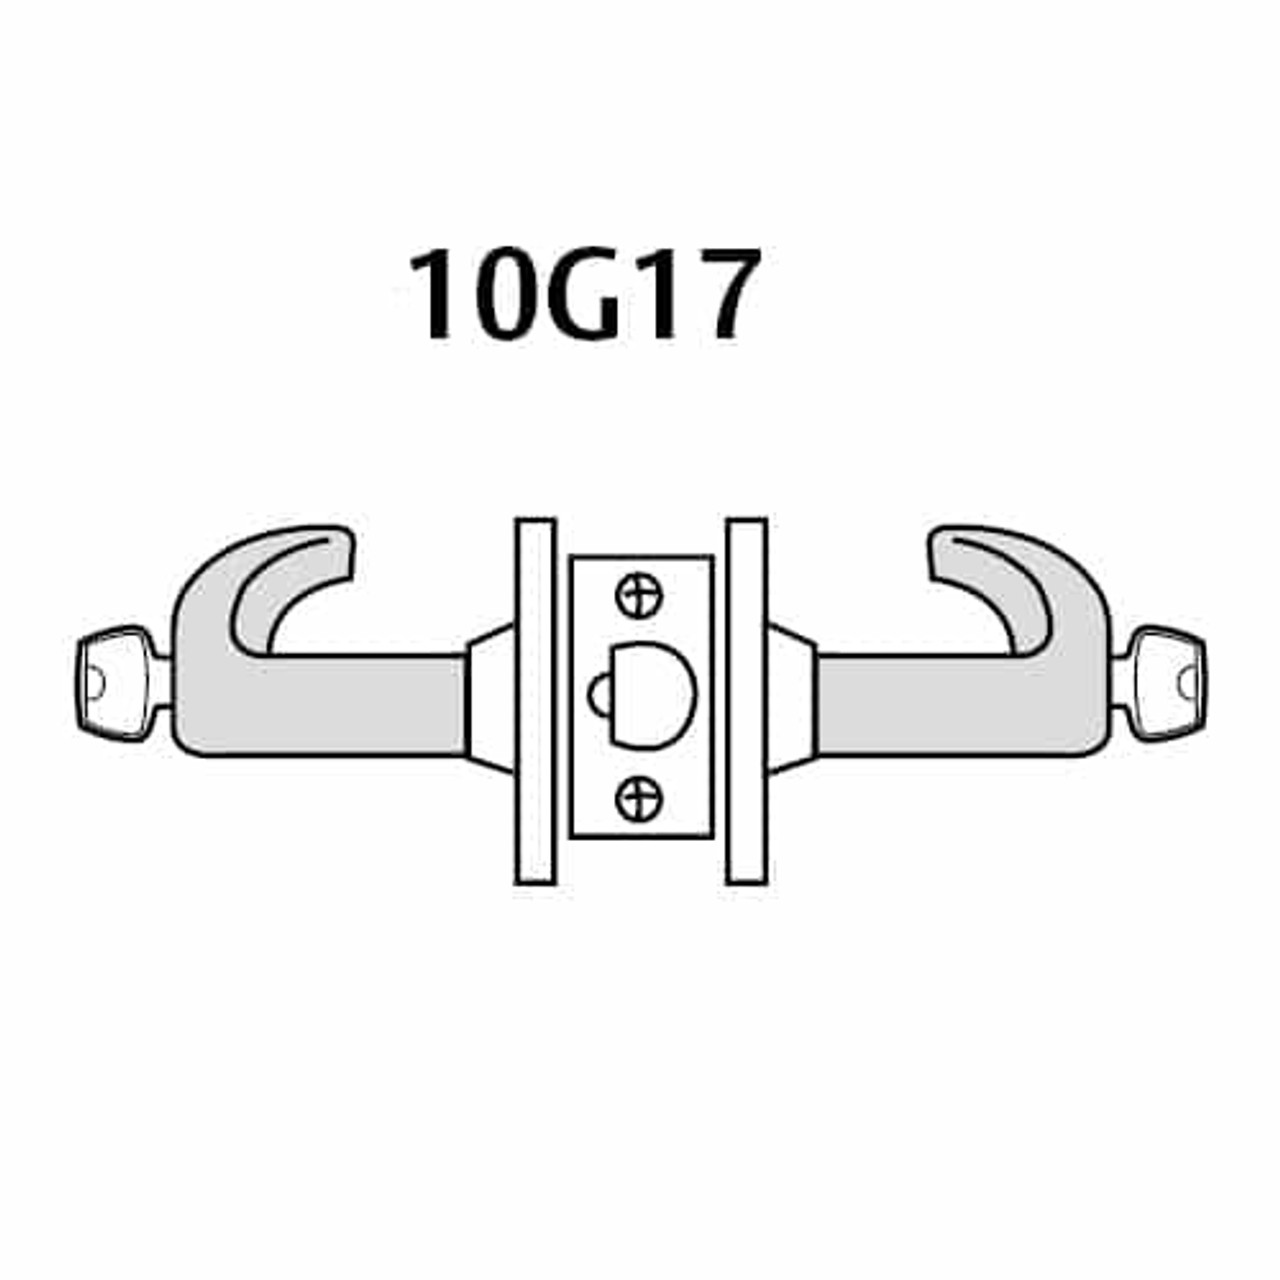 2860-10G17-LP-04 Sargent 10 Line Cylindrical Institutional Locks with P Lever Design and L Rose Prepped for LFIC in Satin Brass